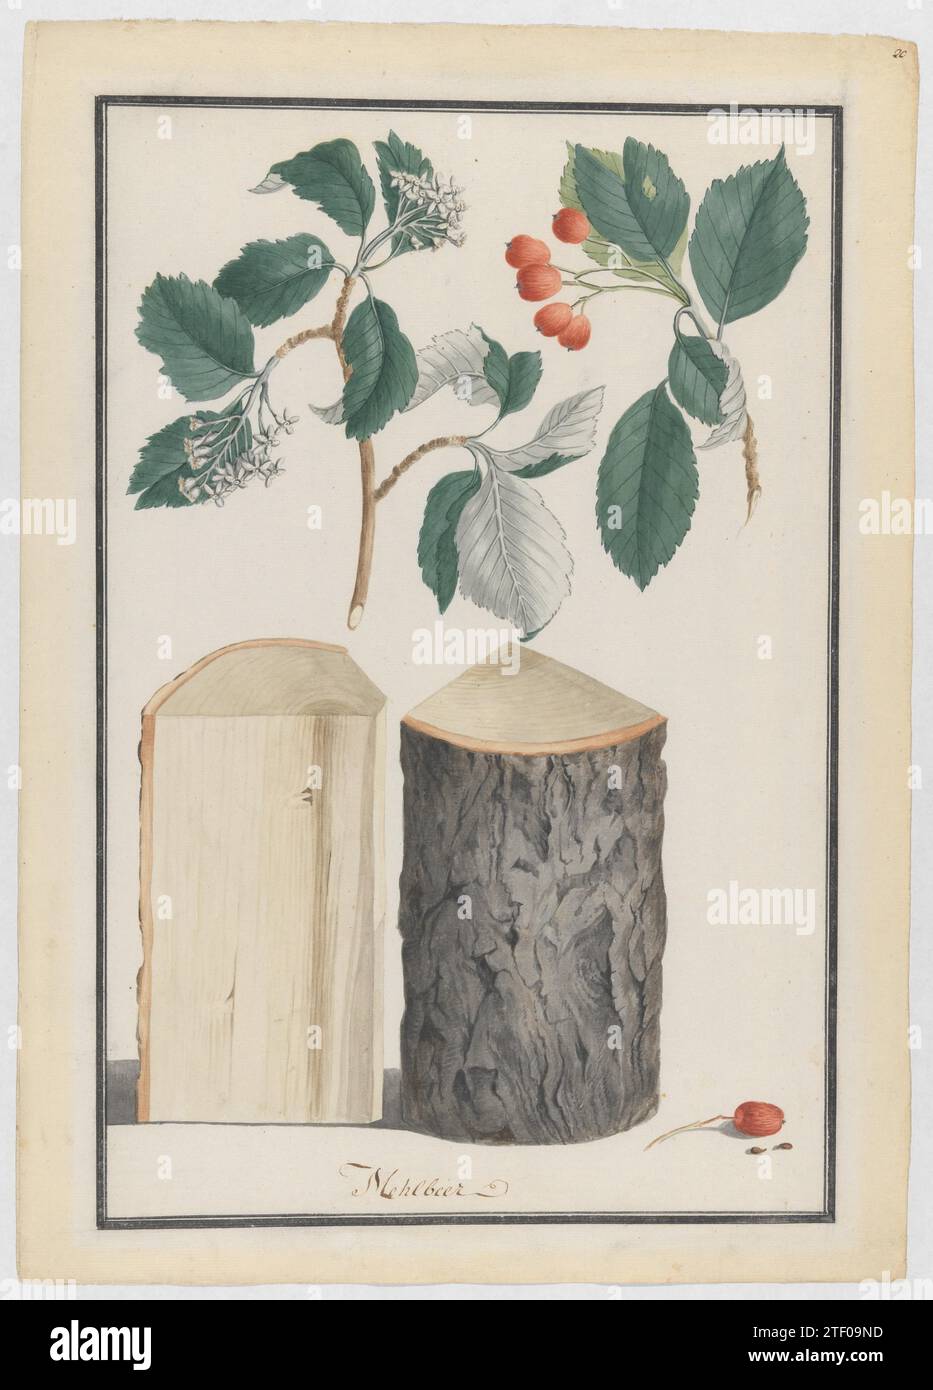 Studies of the leaves, blossoms, fruits and trunk of a whitebeam (Sorbus subgenus Aria) 2009 by Ludwig Pfleger Stock Photo